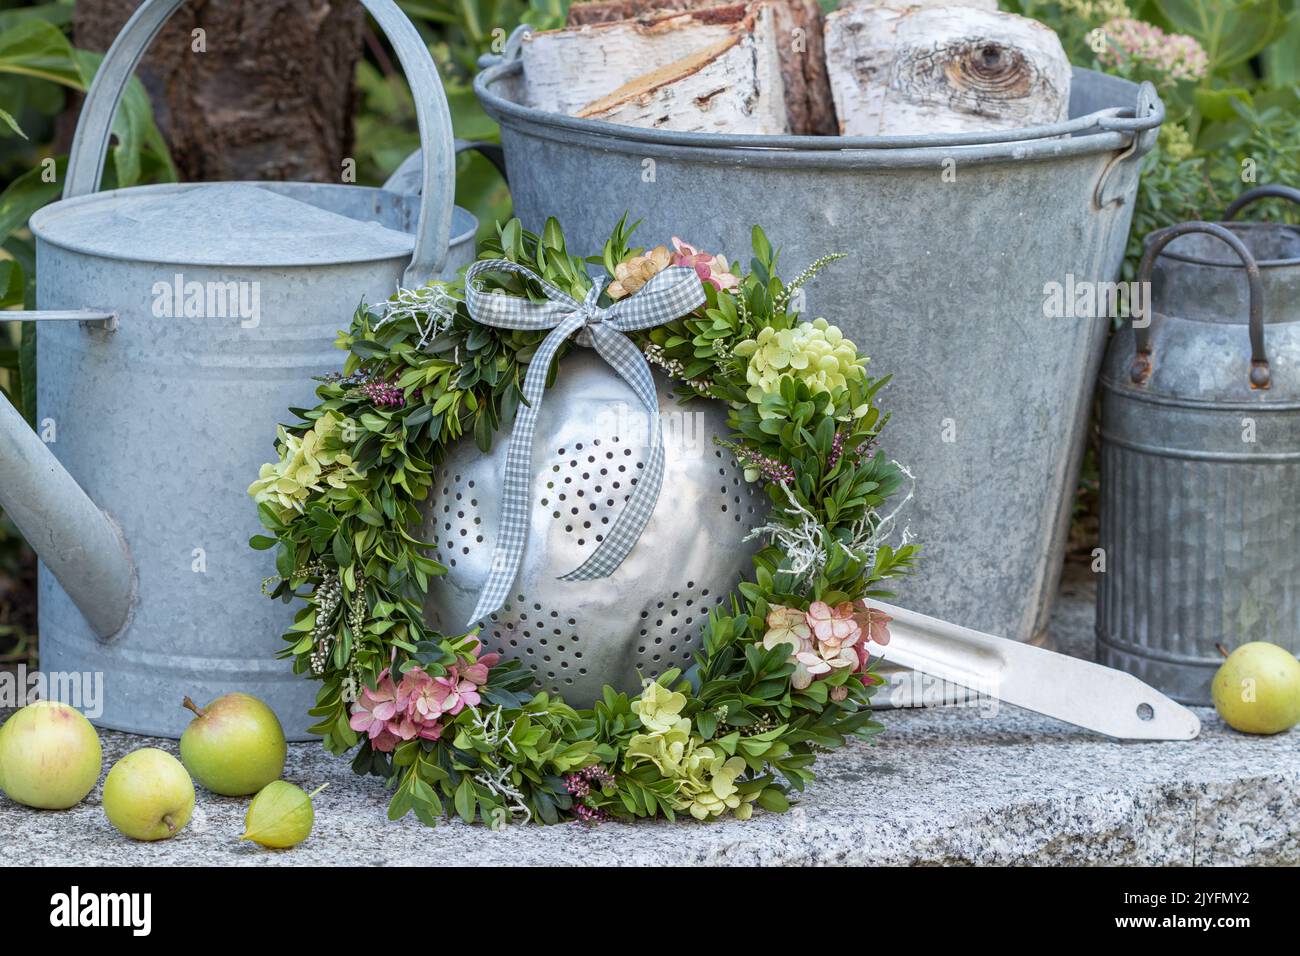 arrangement with wreath of hydrangea flowers and box tree branches and vintage zinc objekts Stock Photo